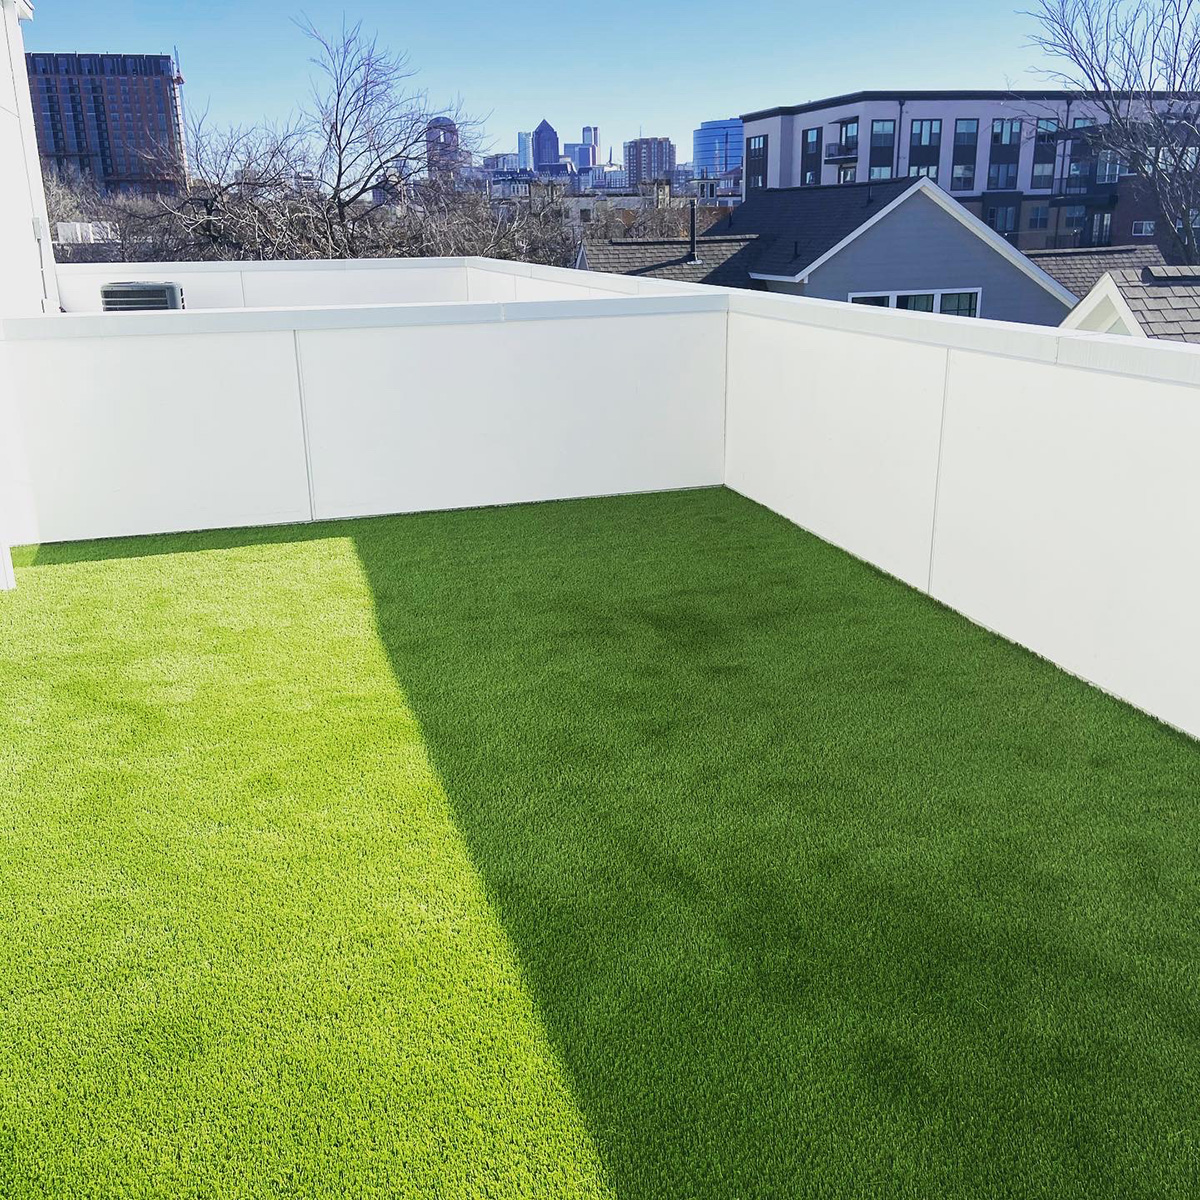 Commercial Turf Installations in Dallas / Fort Worth